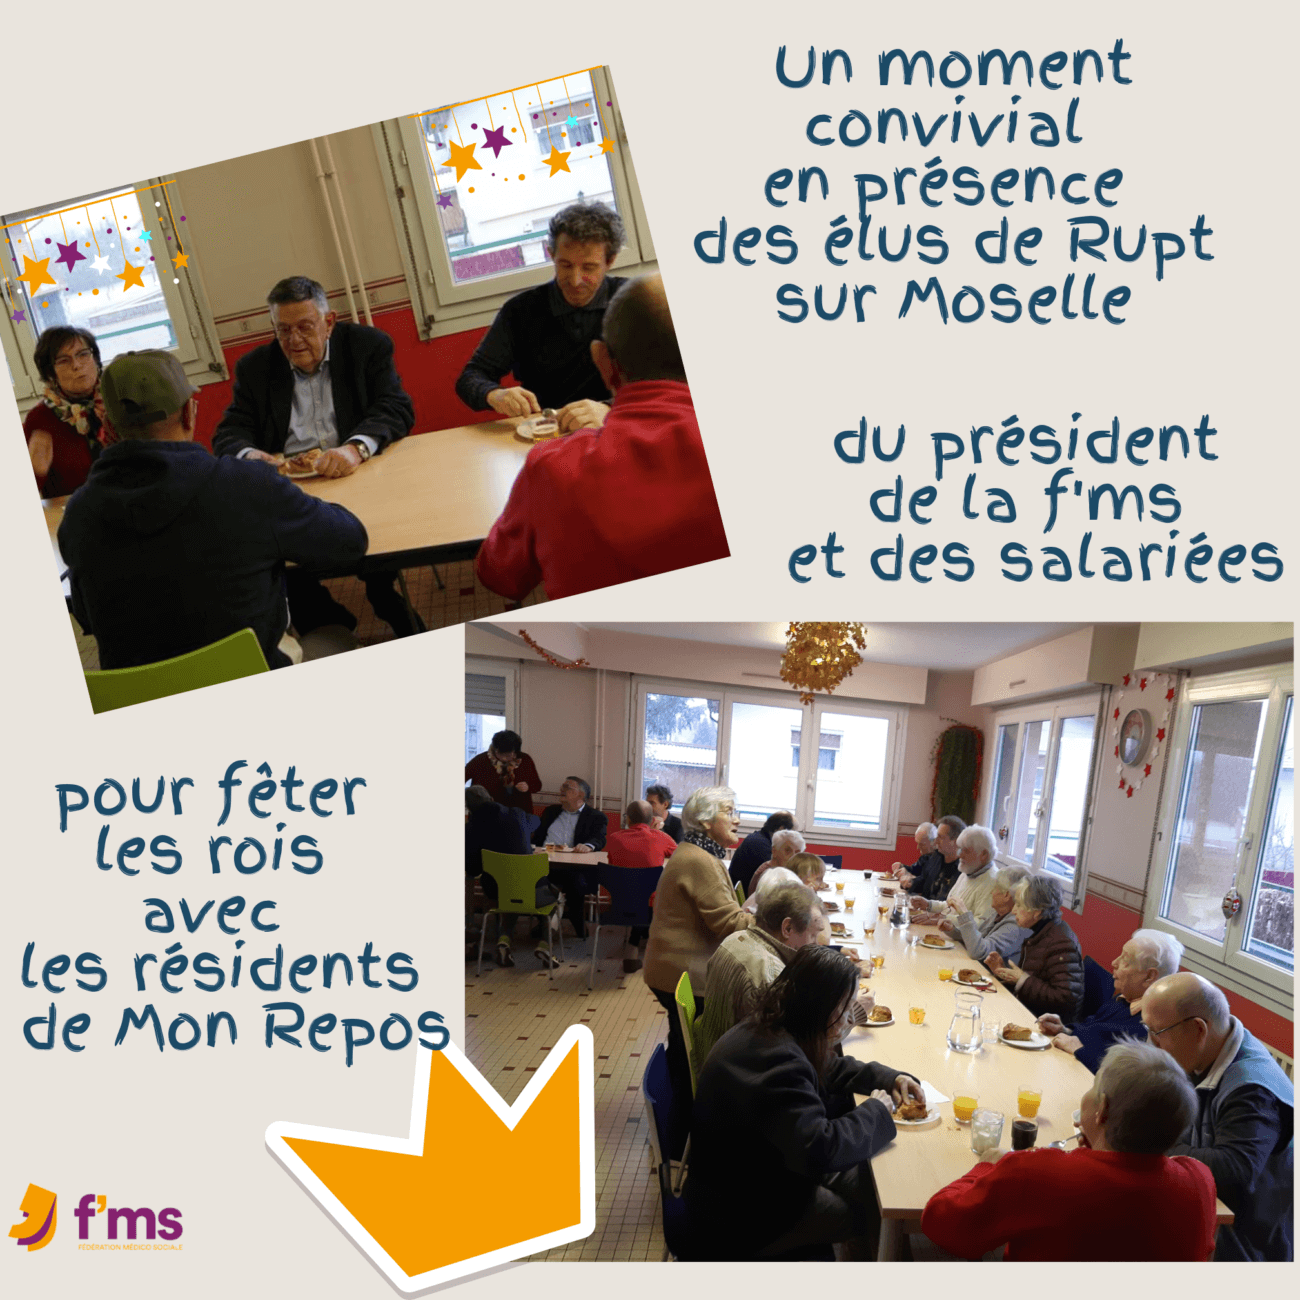 voeux rupt sur moselle residence mon repos - 2 fms